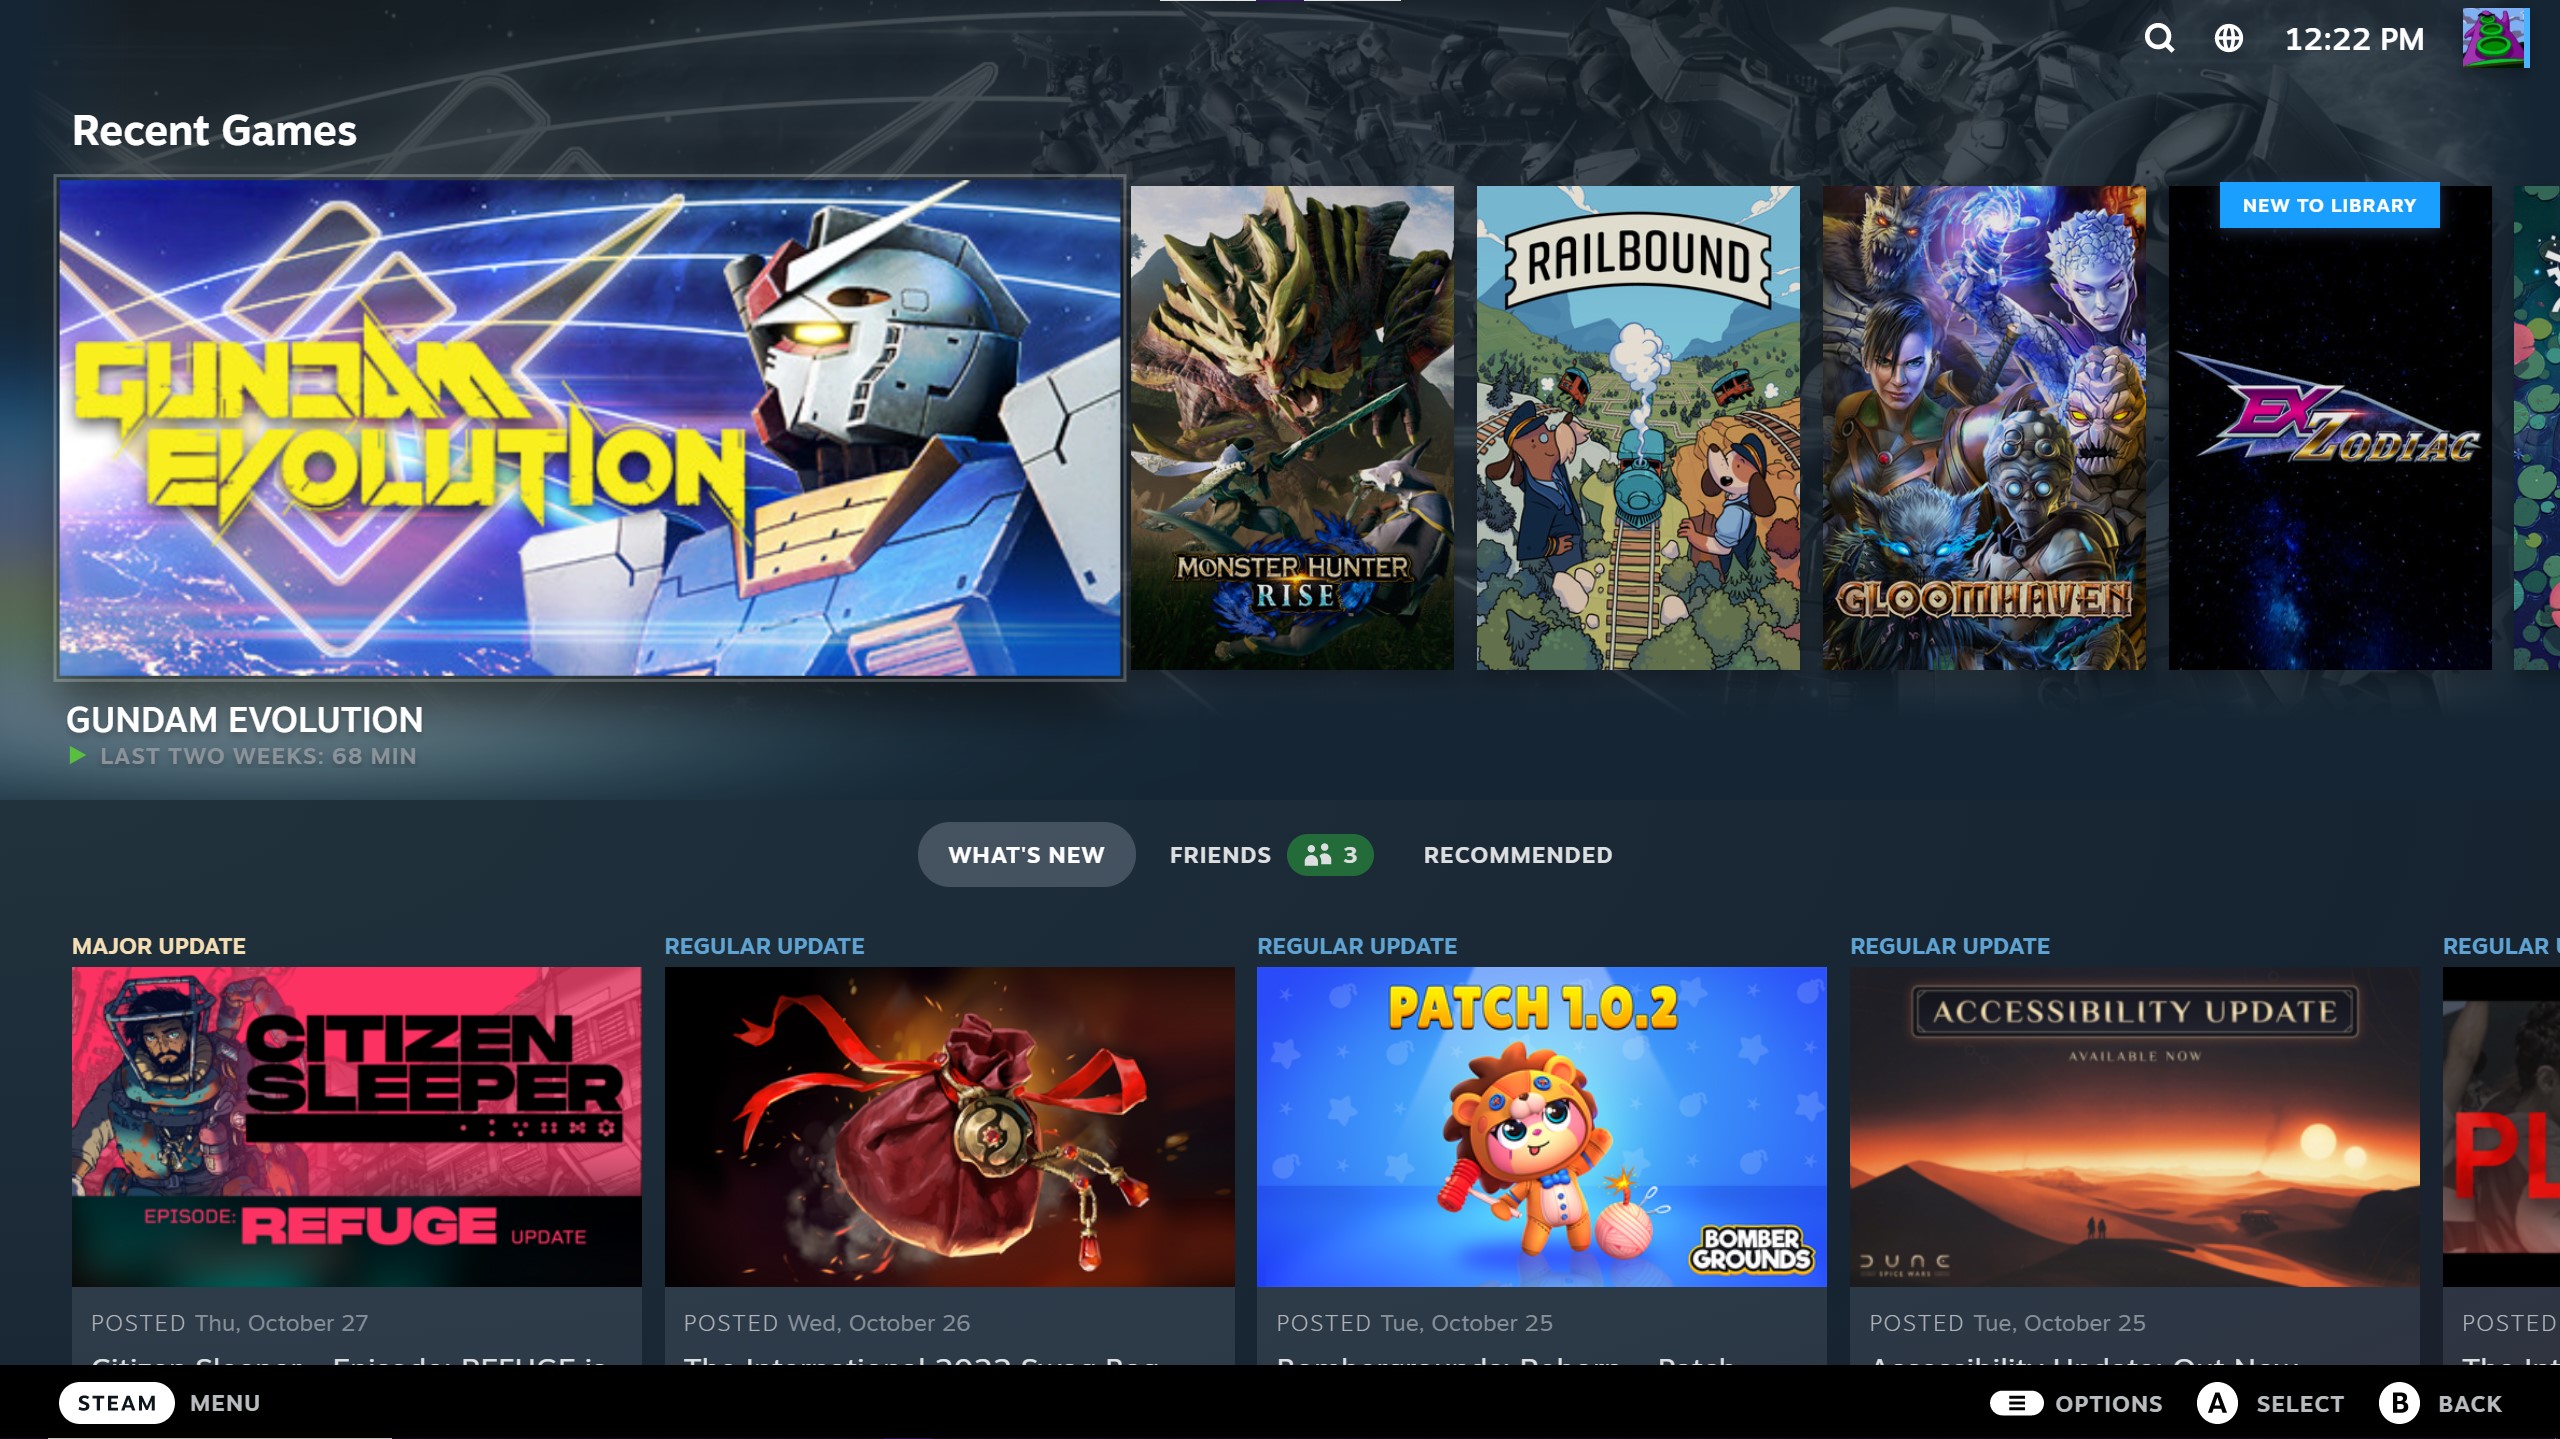  Steam Deck's new UI is finally coming to desktop Big Picture mode 